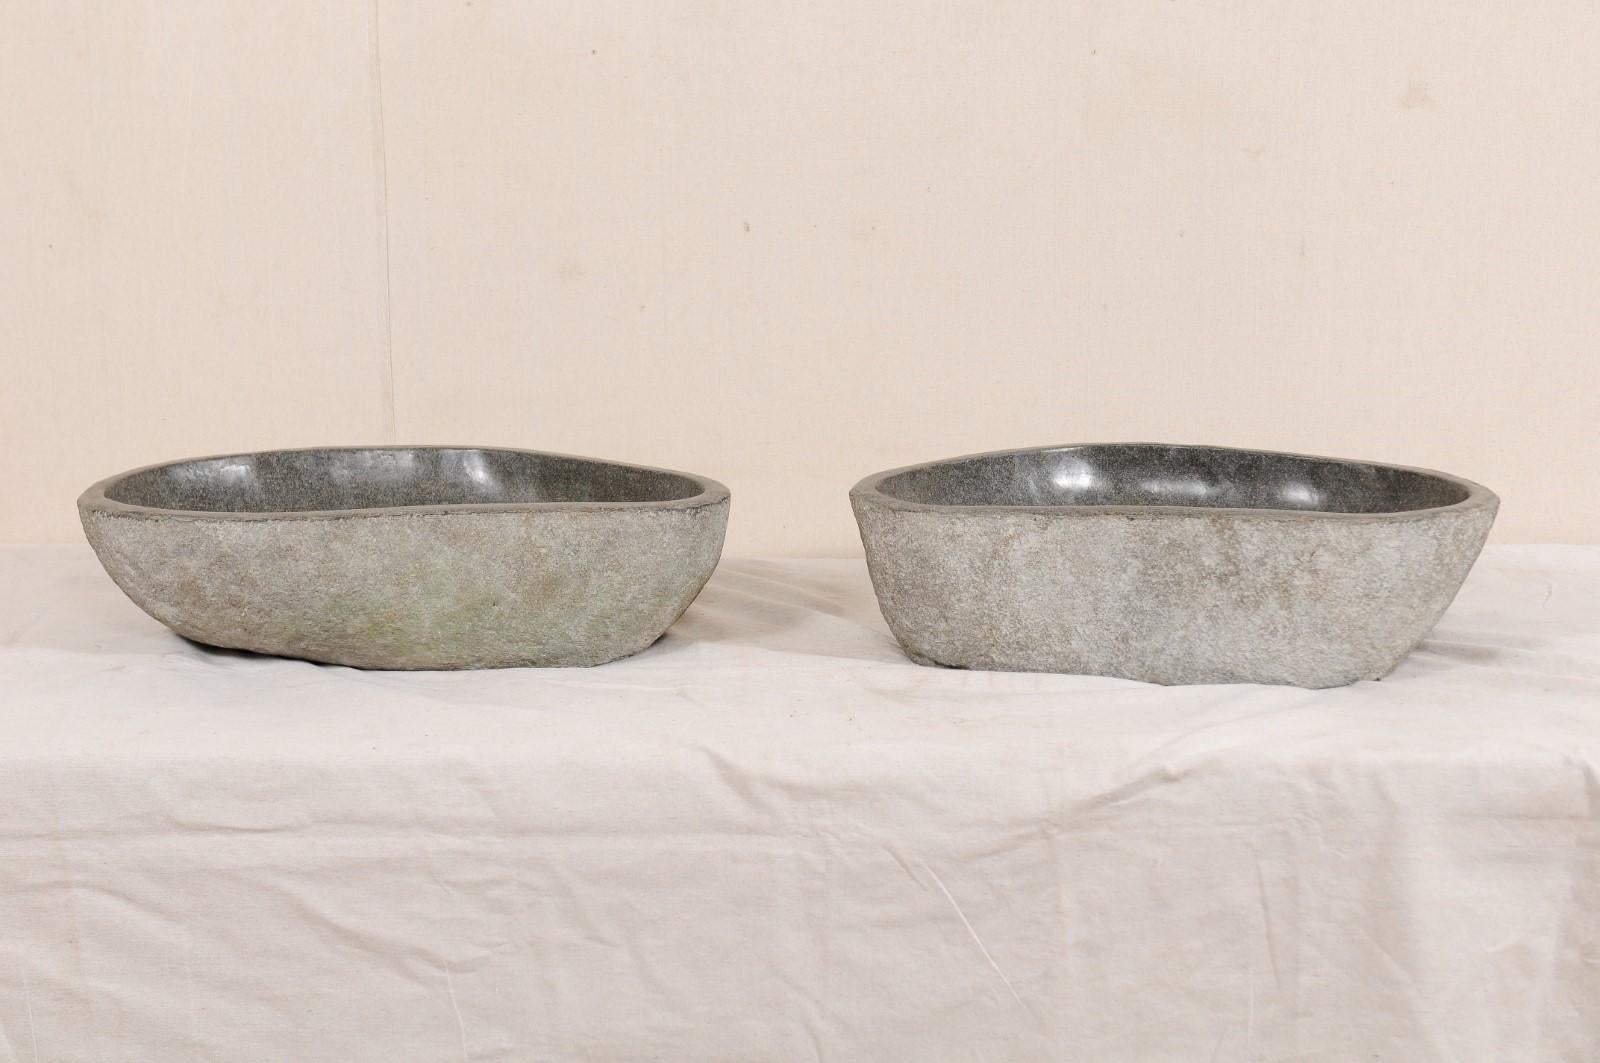 A pair of river rock wash basins. This pair of sinks have each been carved from a single, natural river rock boulder. Each sink has a polished bowl with natural stone on the exterior. Beautifully organic designs courtesy of Mother Nature, no two